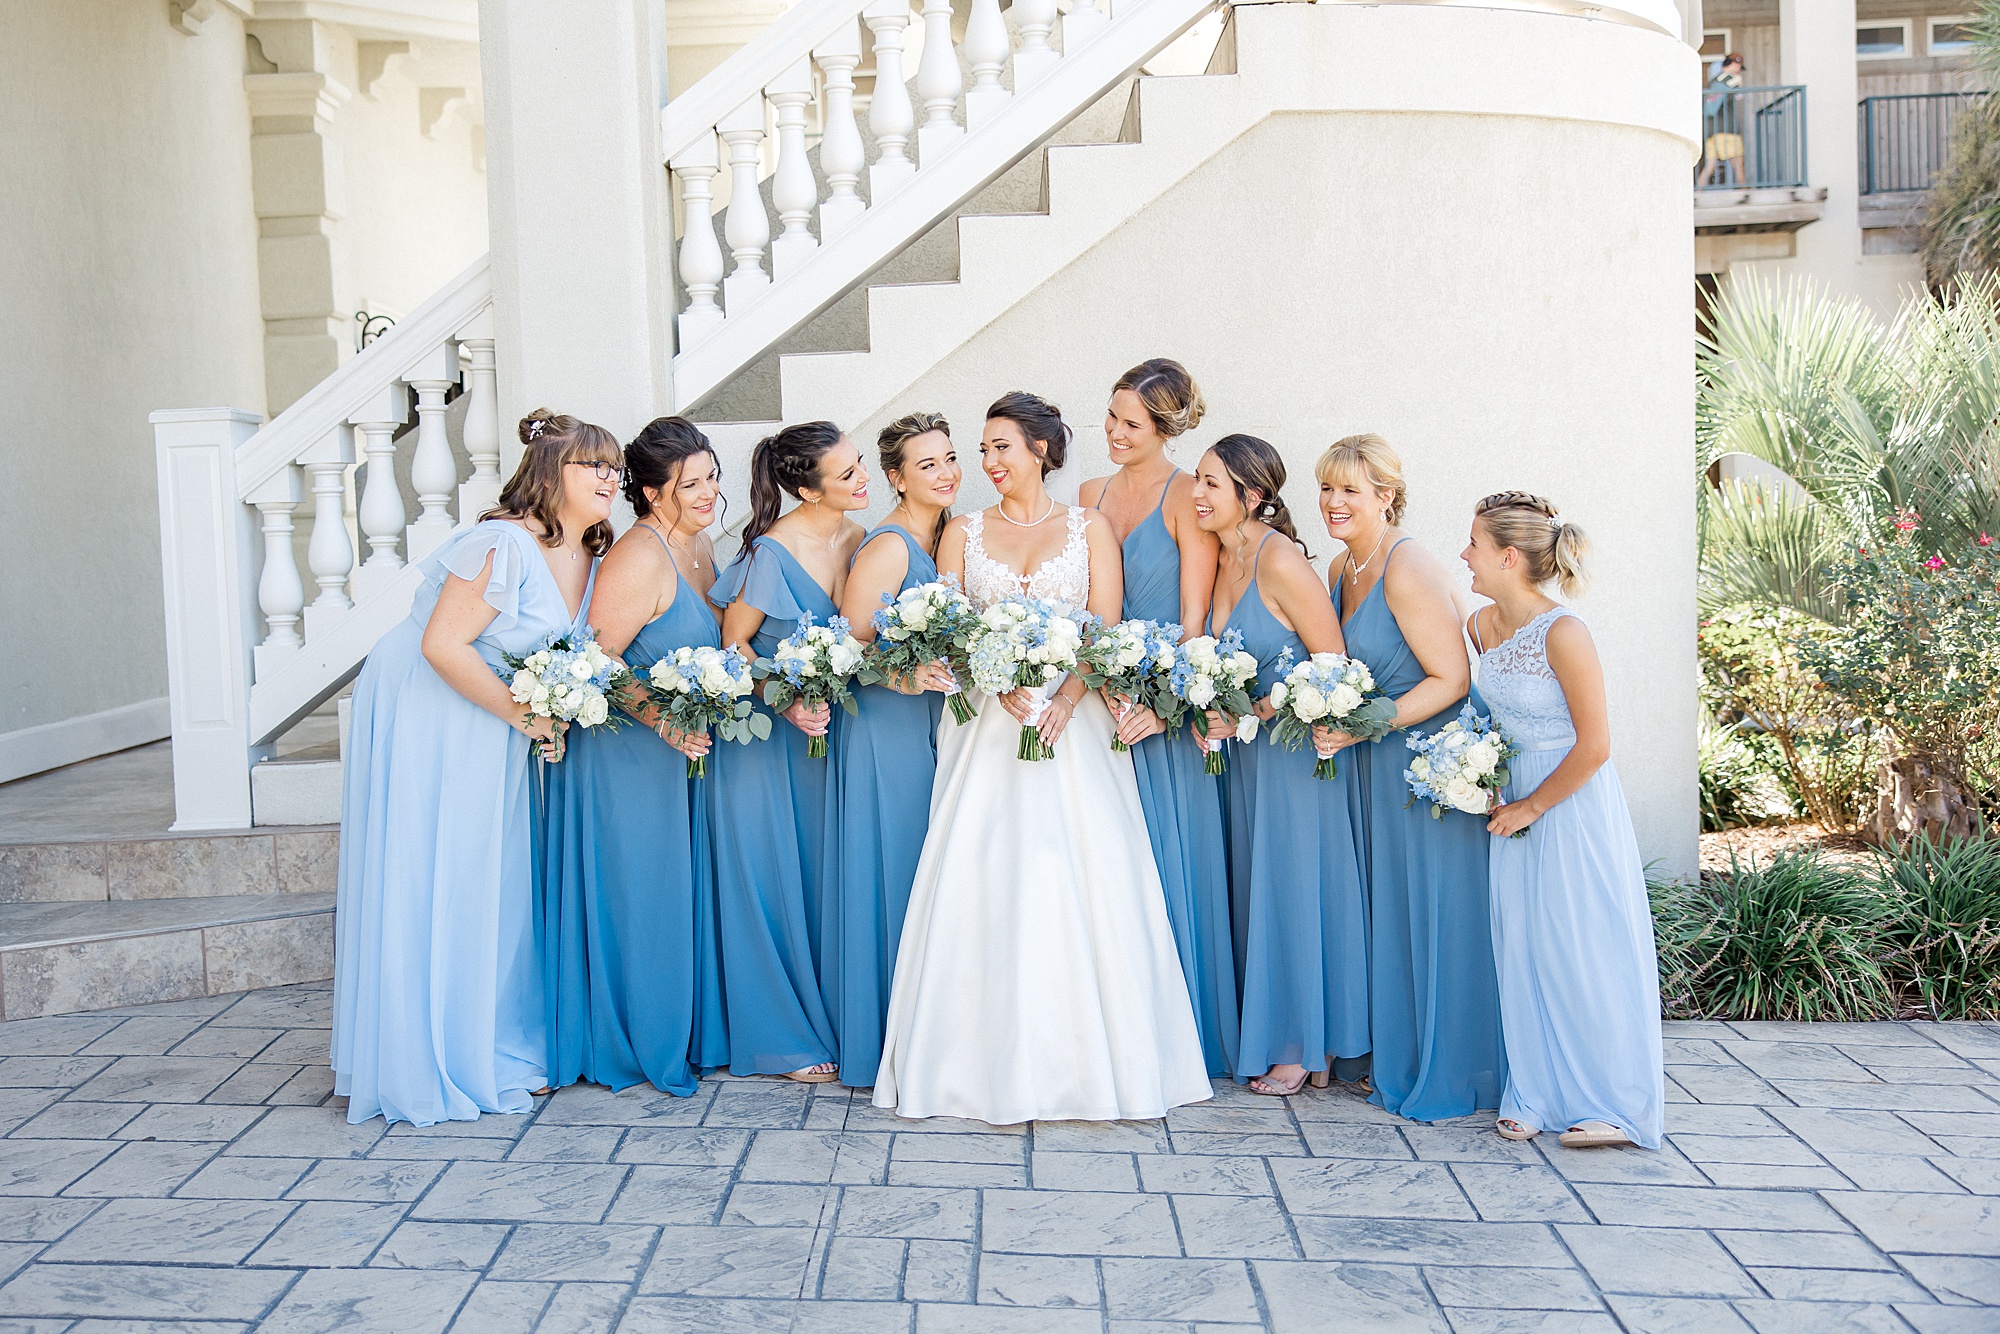 bridal party in shades of blue from Ocean Isle Beach Wedding